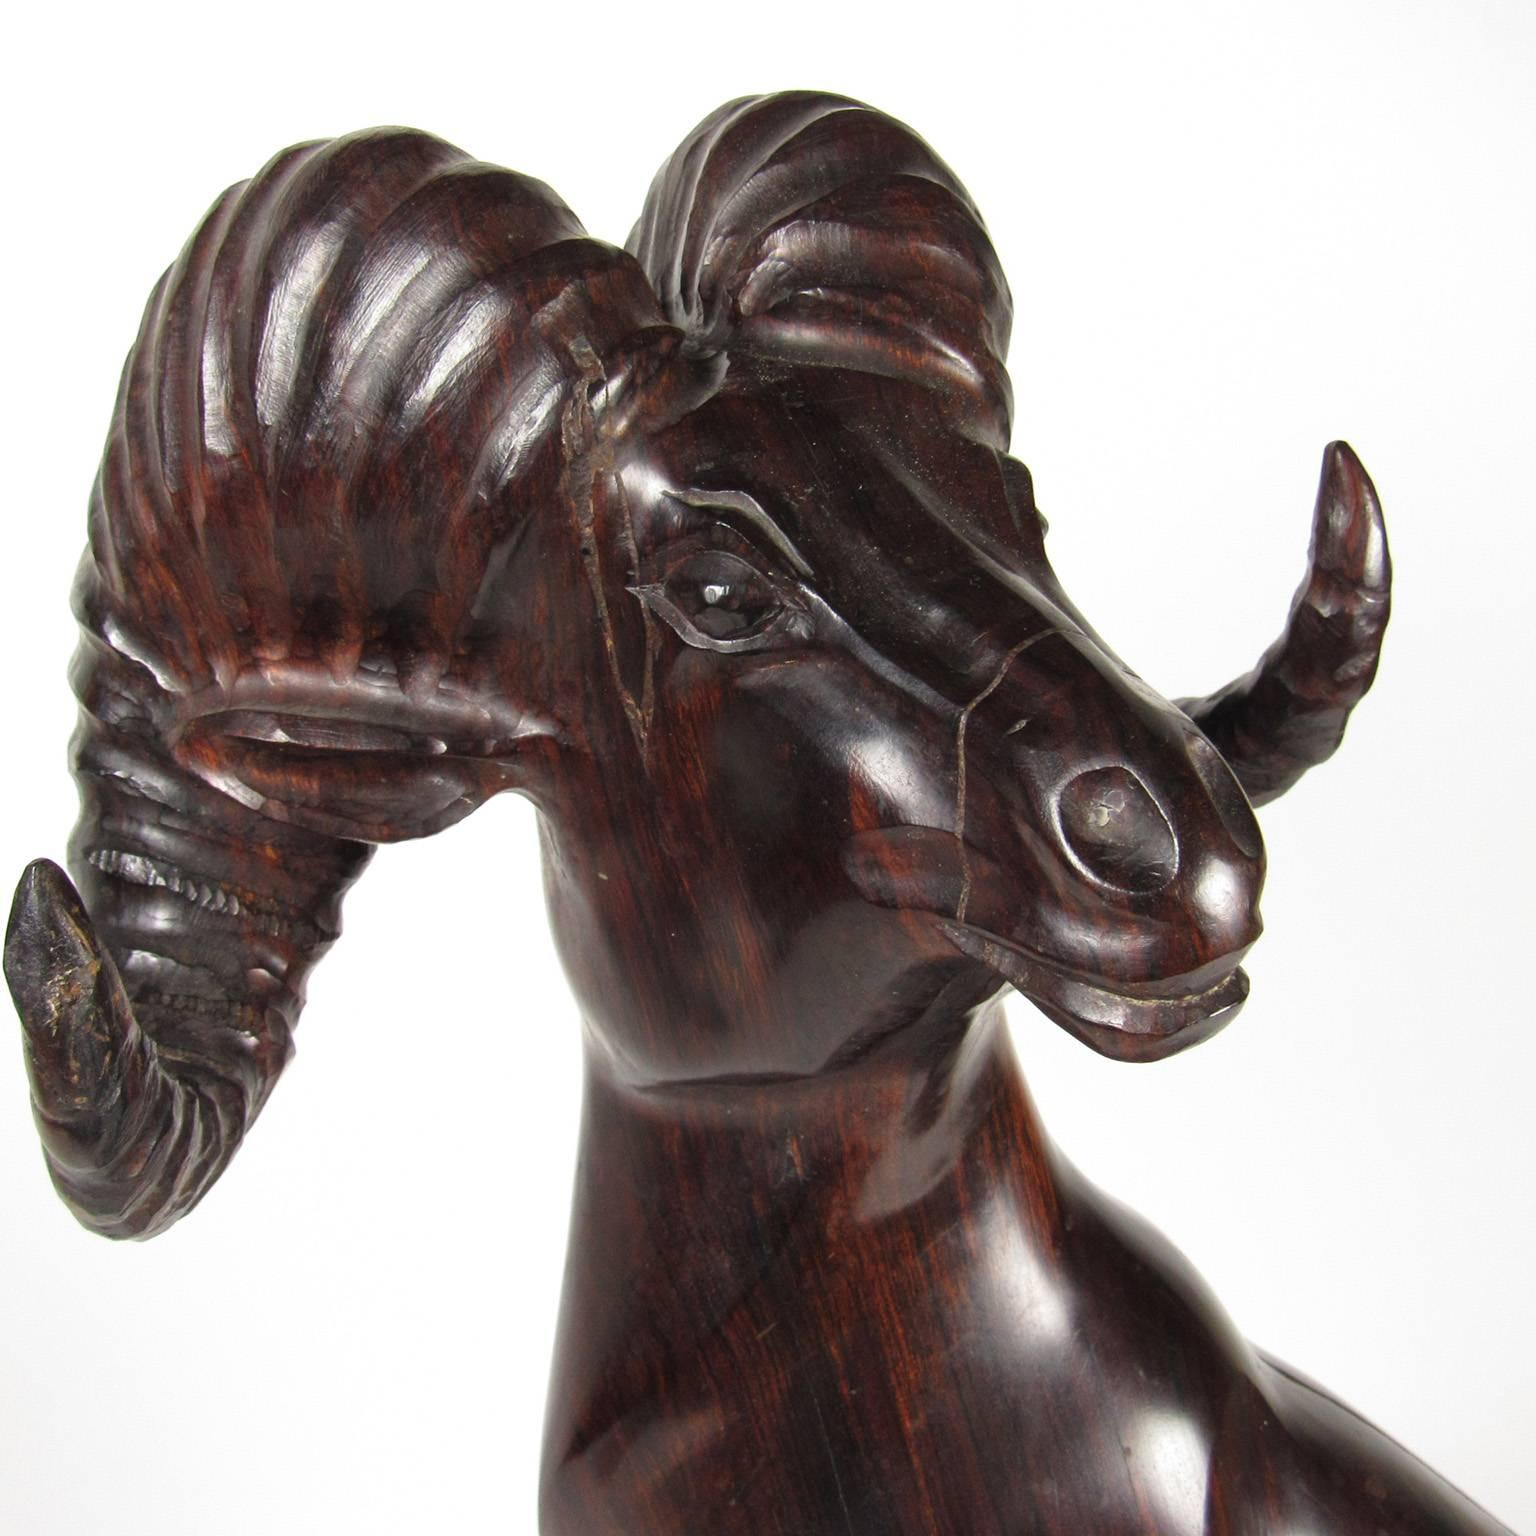 American School 20th century Folk Art carved wood figure of a ram, signed and dated D. Ayala '92 on base, possible attribution to Donna Ayala, a contemporary Texan sculptor who specialized in wildlife. Measure: Height 25 inches.